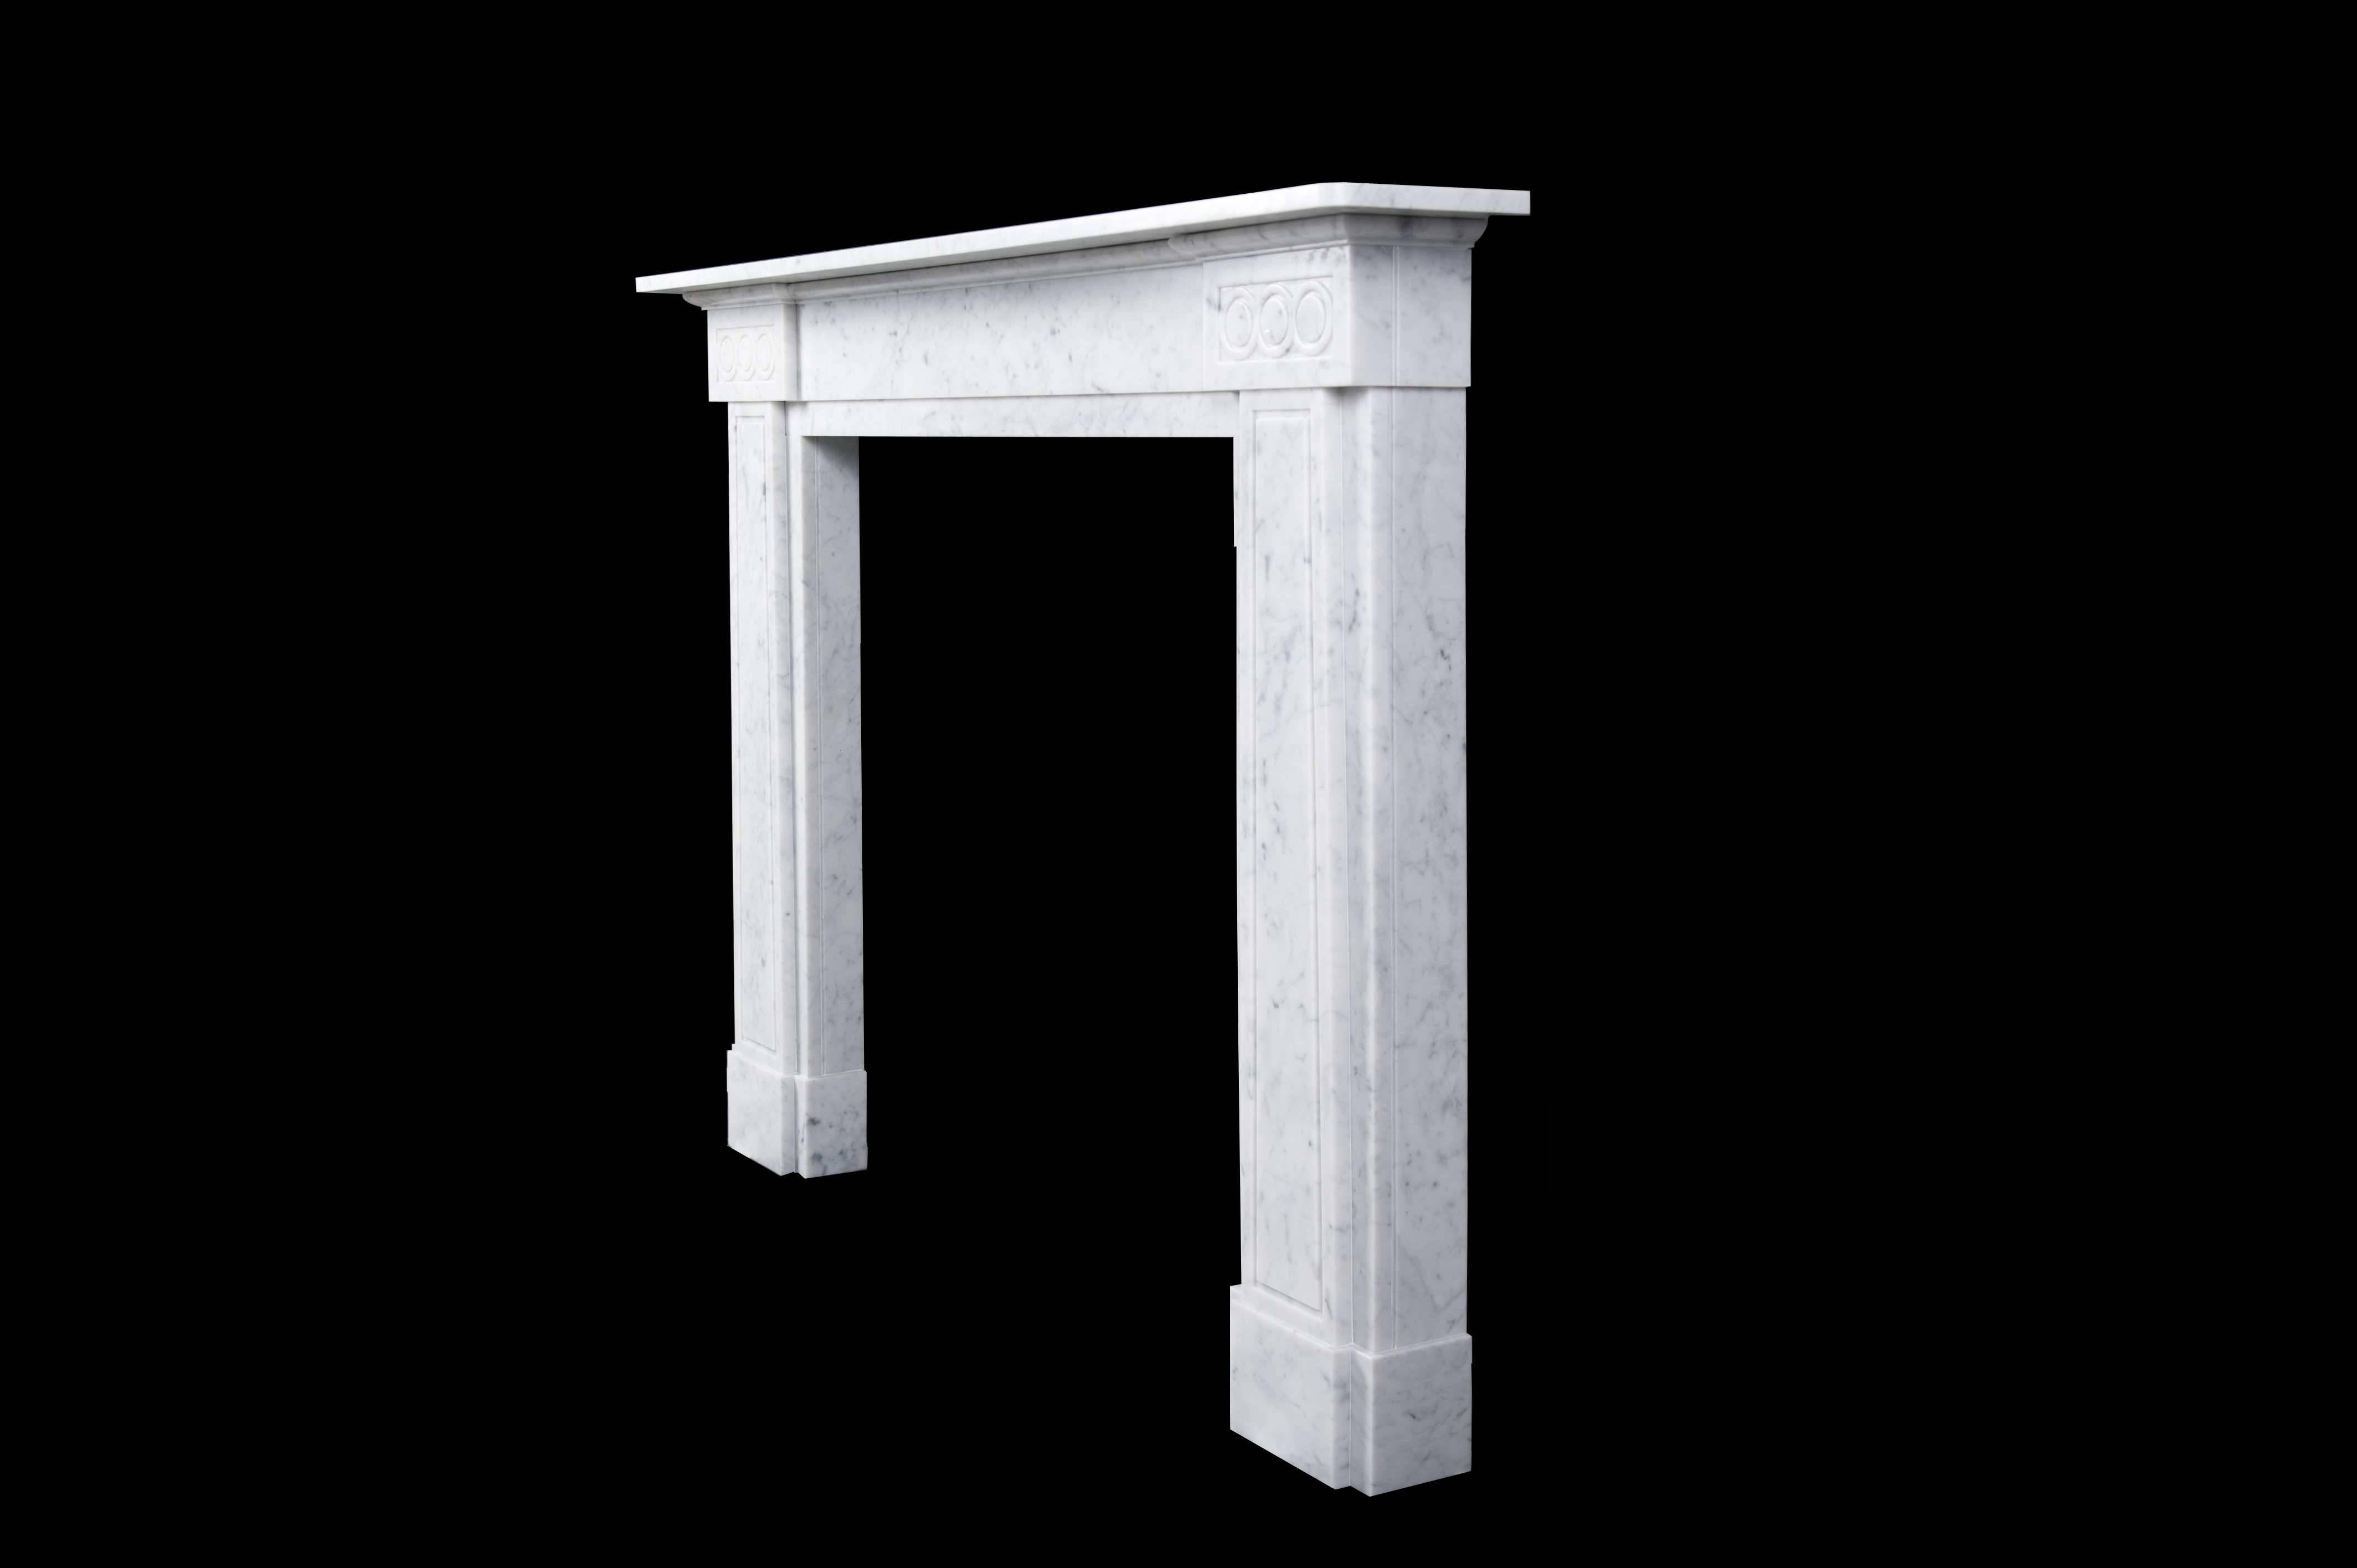 Neoclassical John Soane Inspired Mantelpiece Carved in Carrara Marble